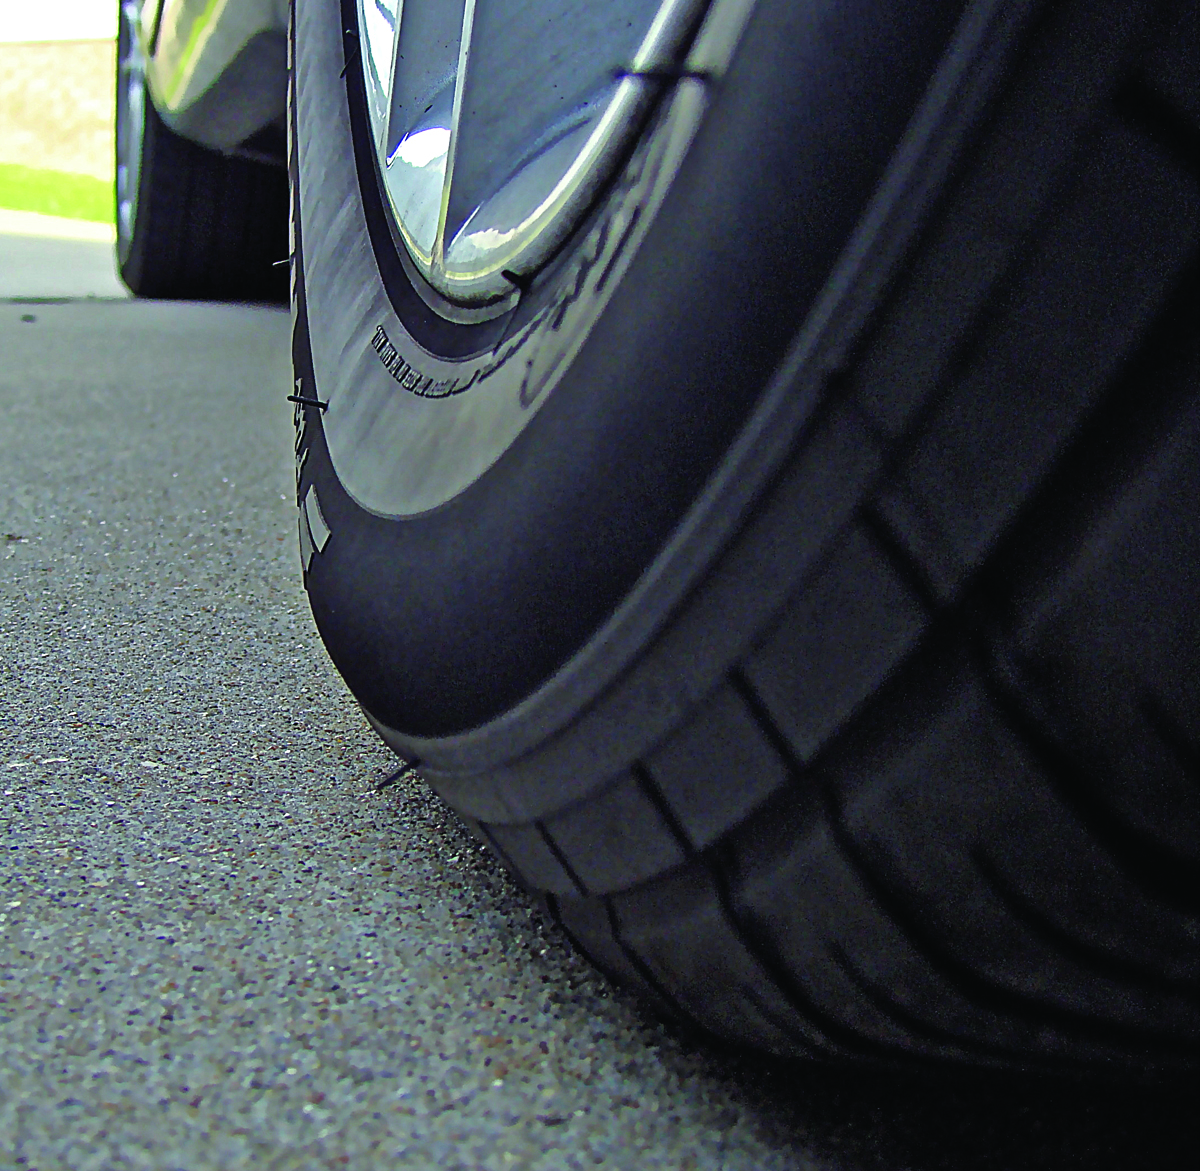 This low-profile car tire begins to bulge when tire pressure drops below 25 psi.